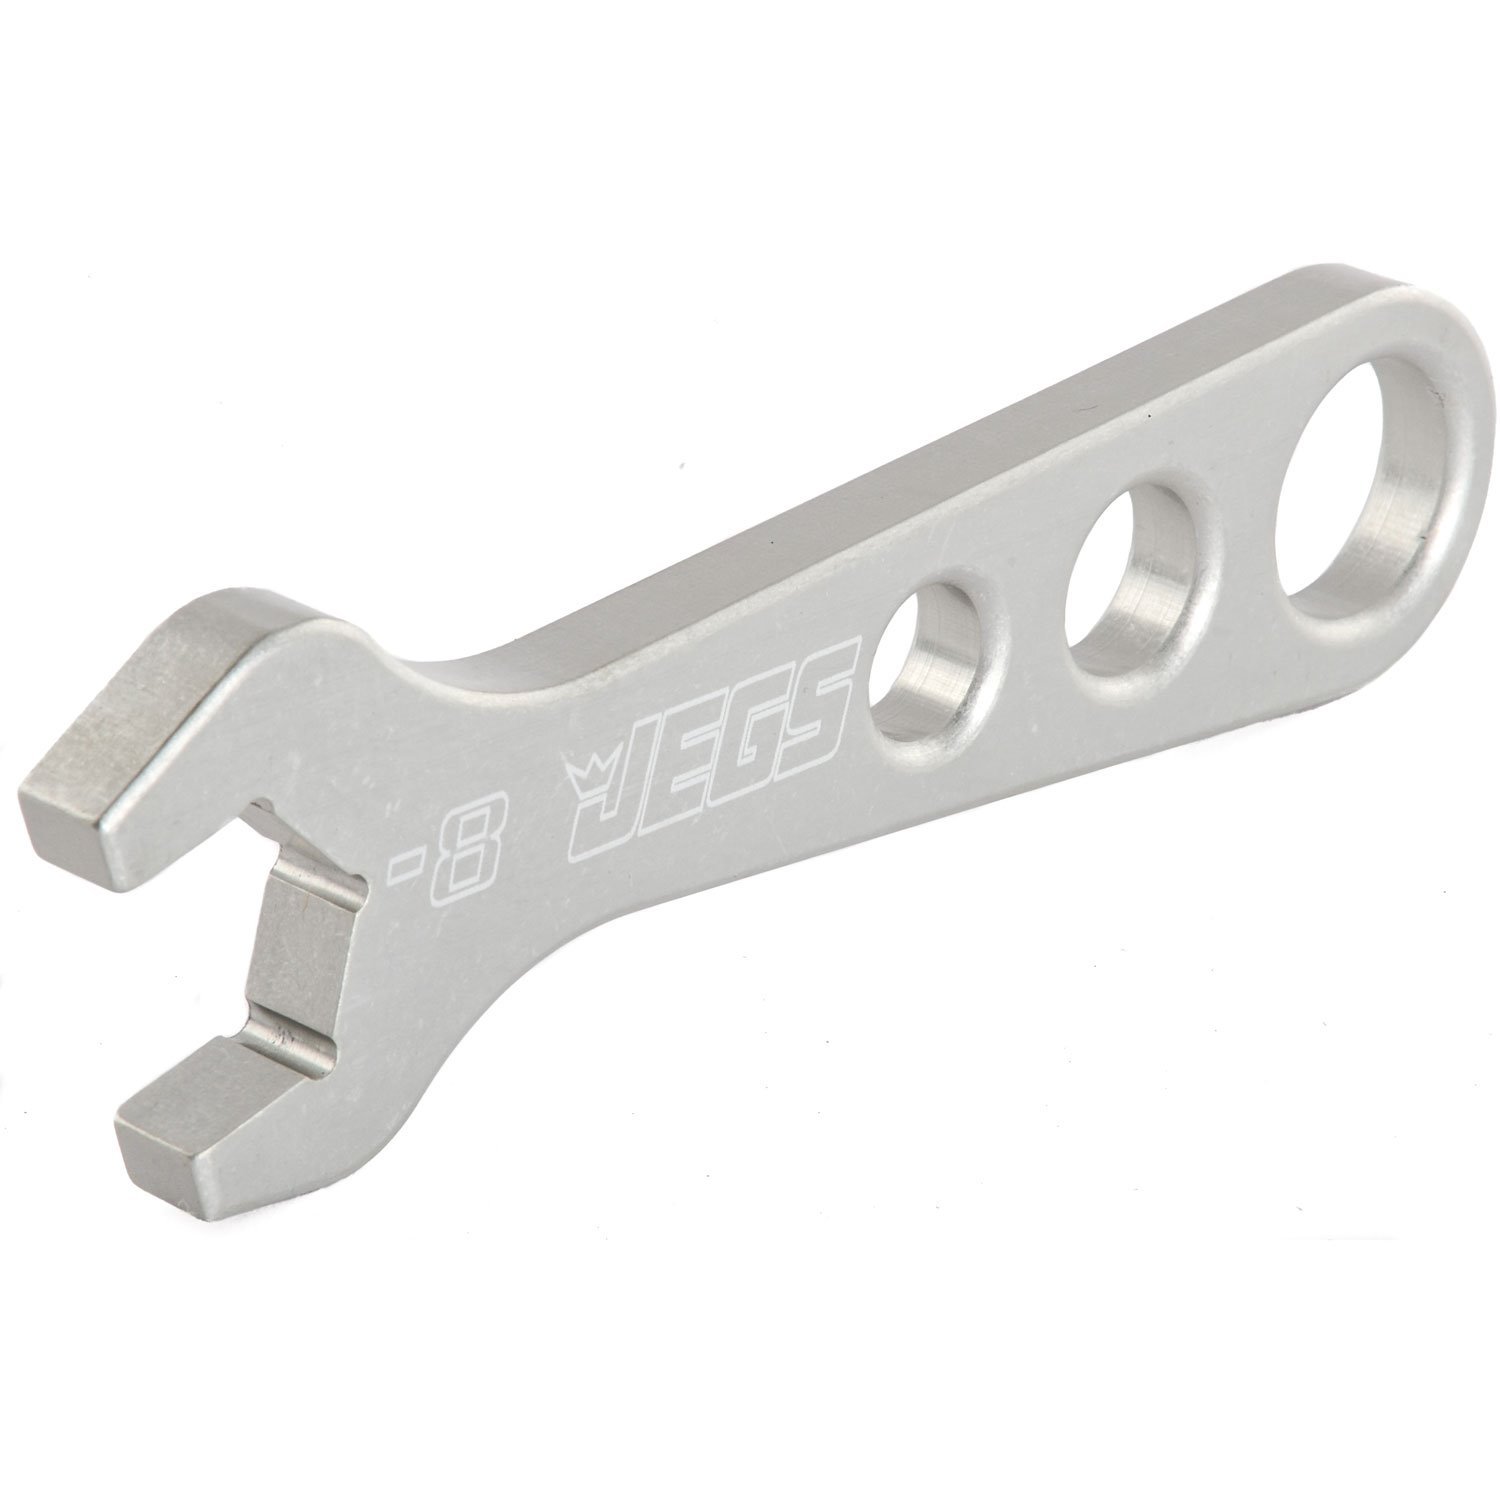 AN Standard Wrench Fits -8AN (7/8 in. Hex) Standard Fittings